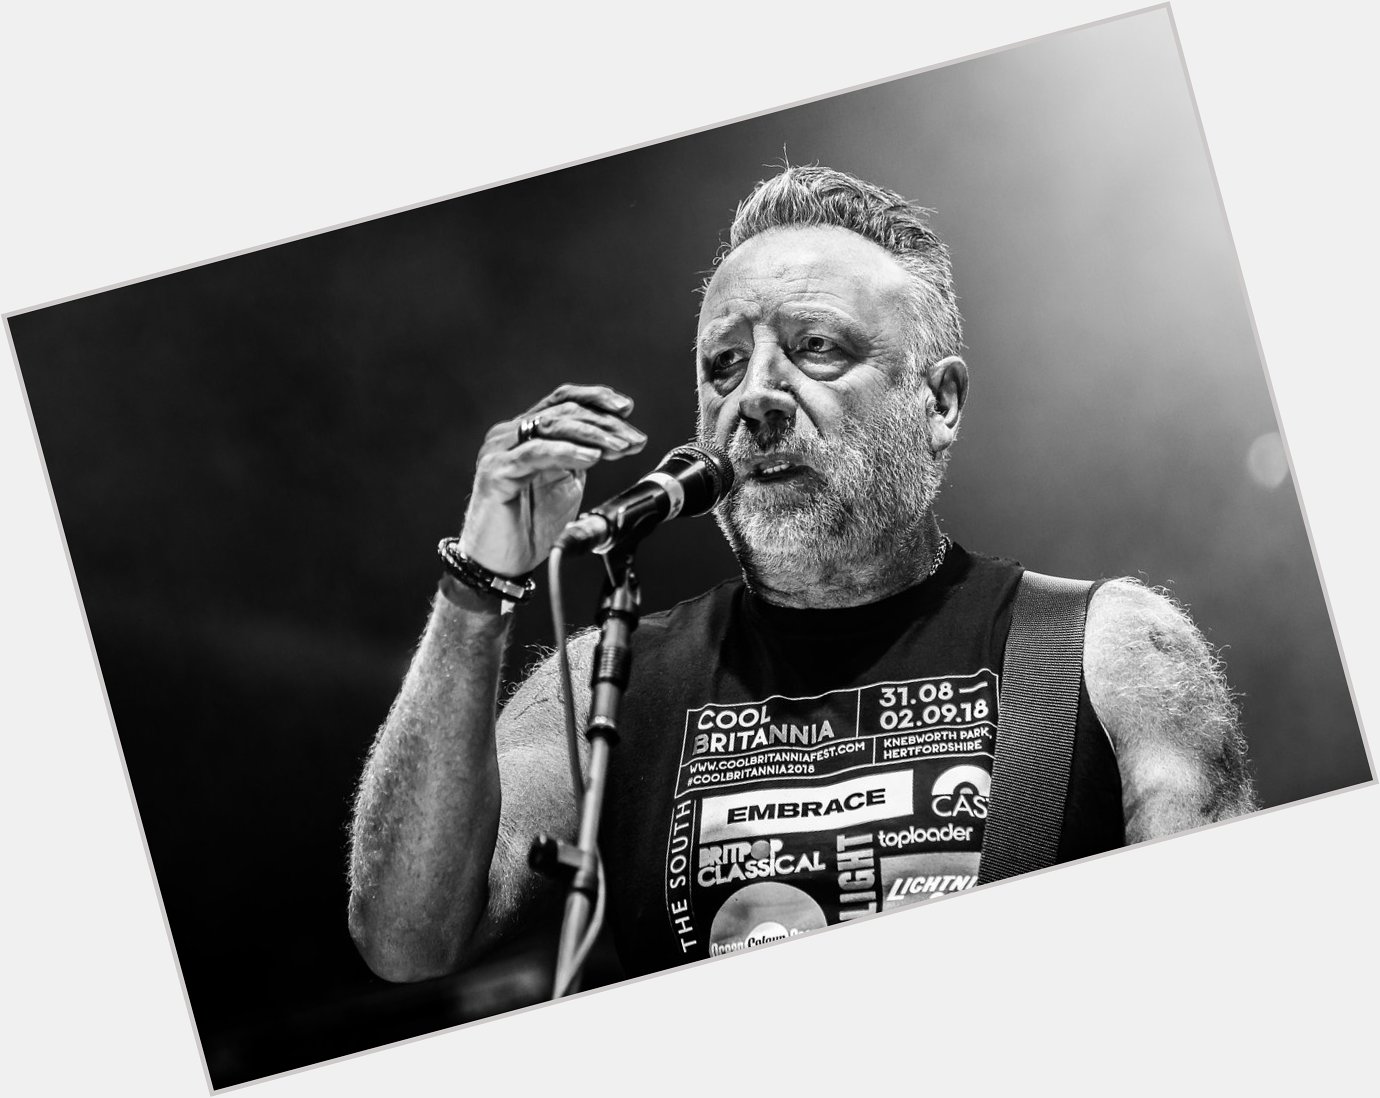 Happy Birthday to Peter Hook for today. 